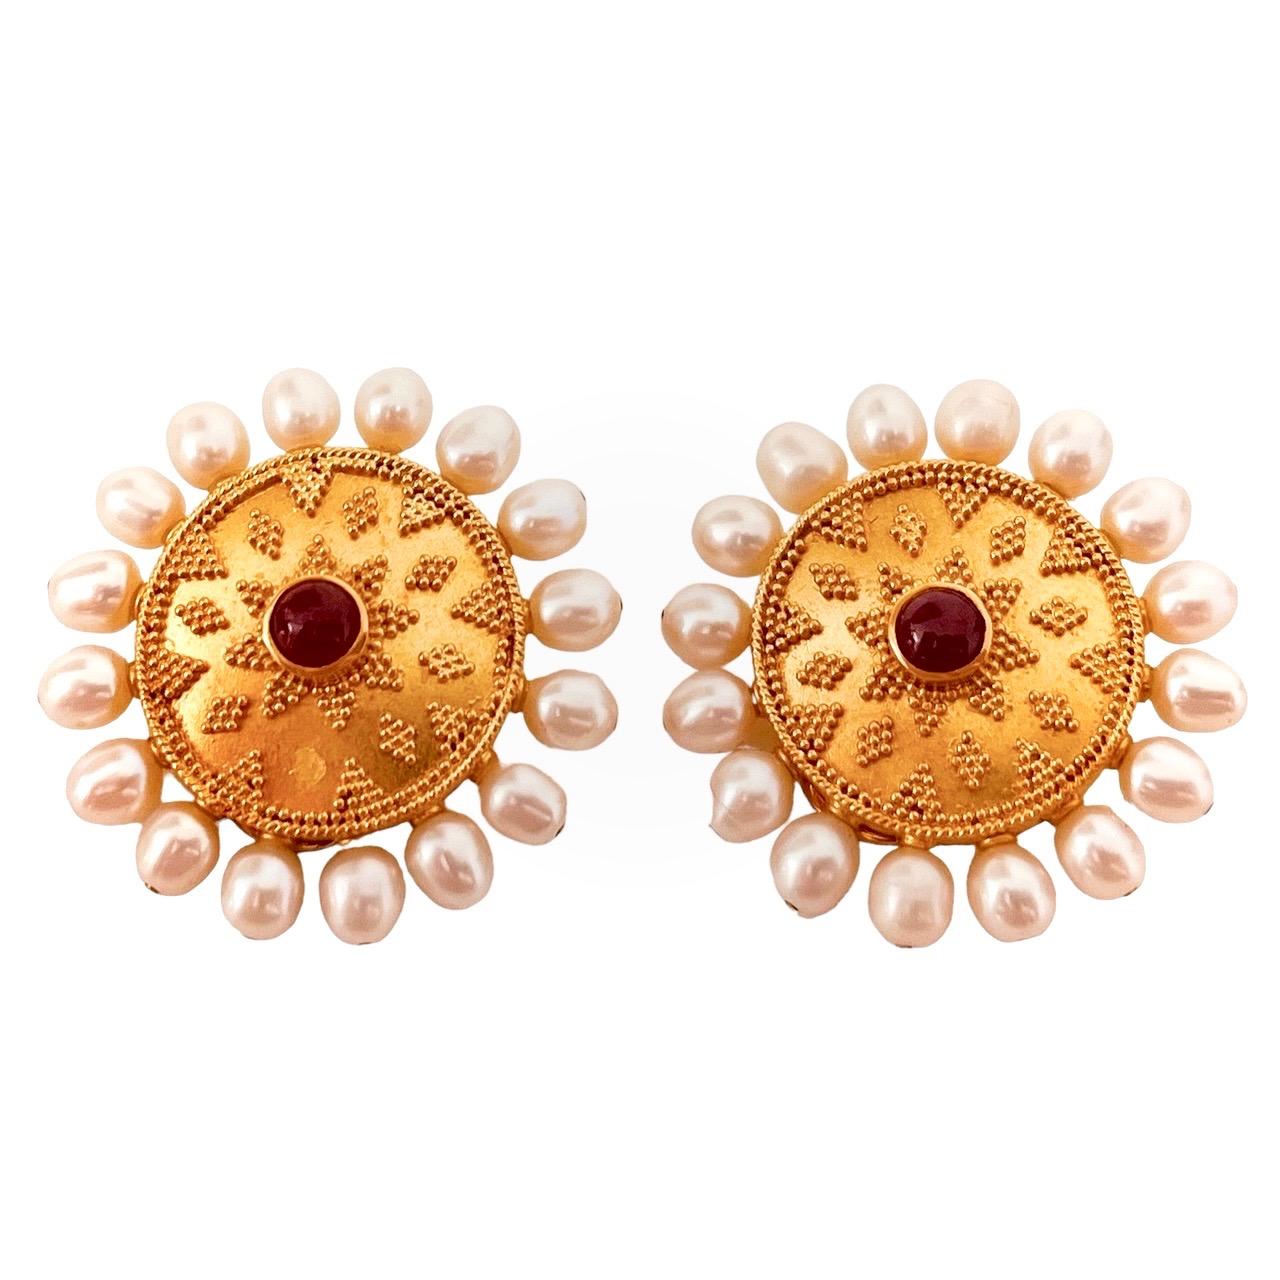 22ct Gold Granulated Disc Earrings Set With A Cabochon Ruby And Cultured Pearls For Sale 6